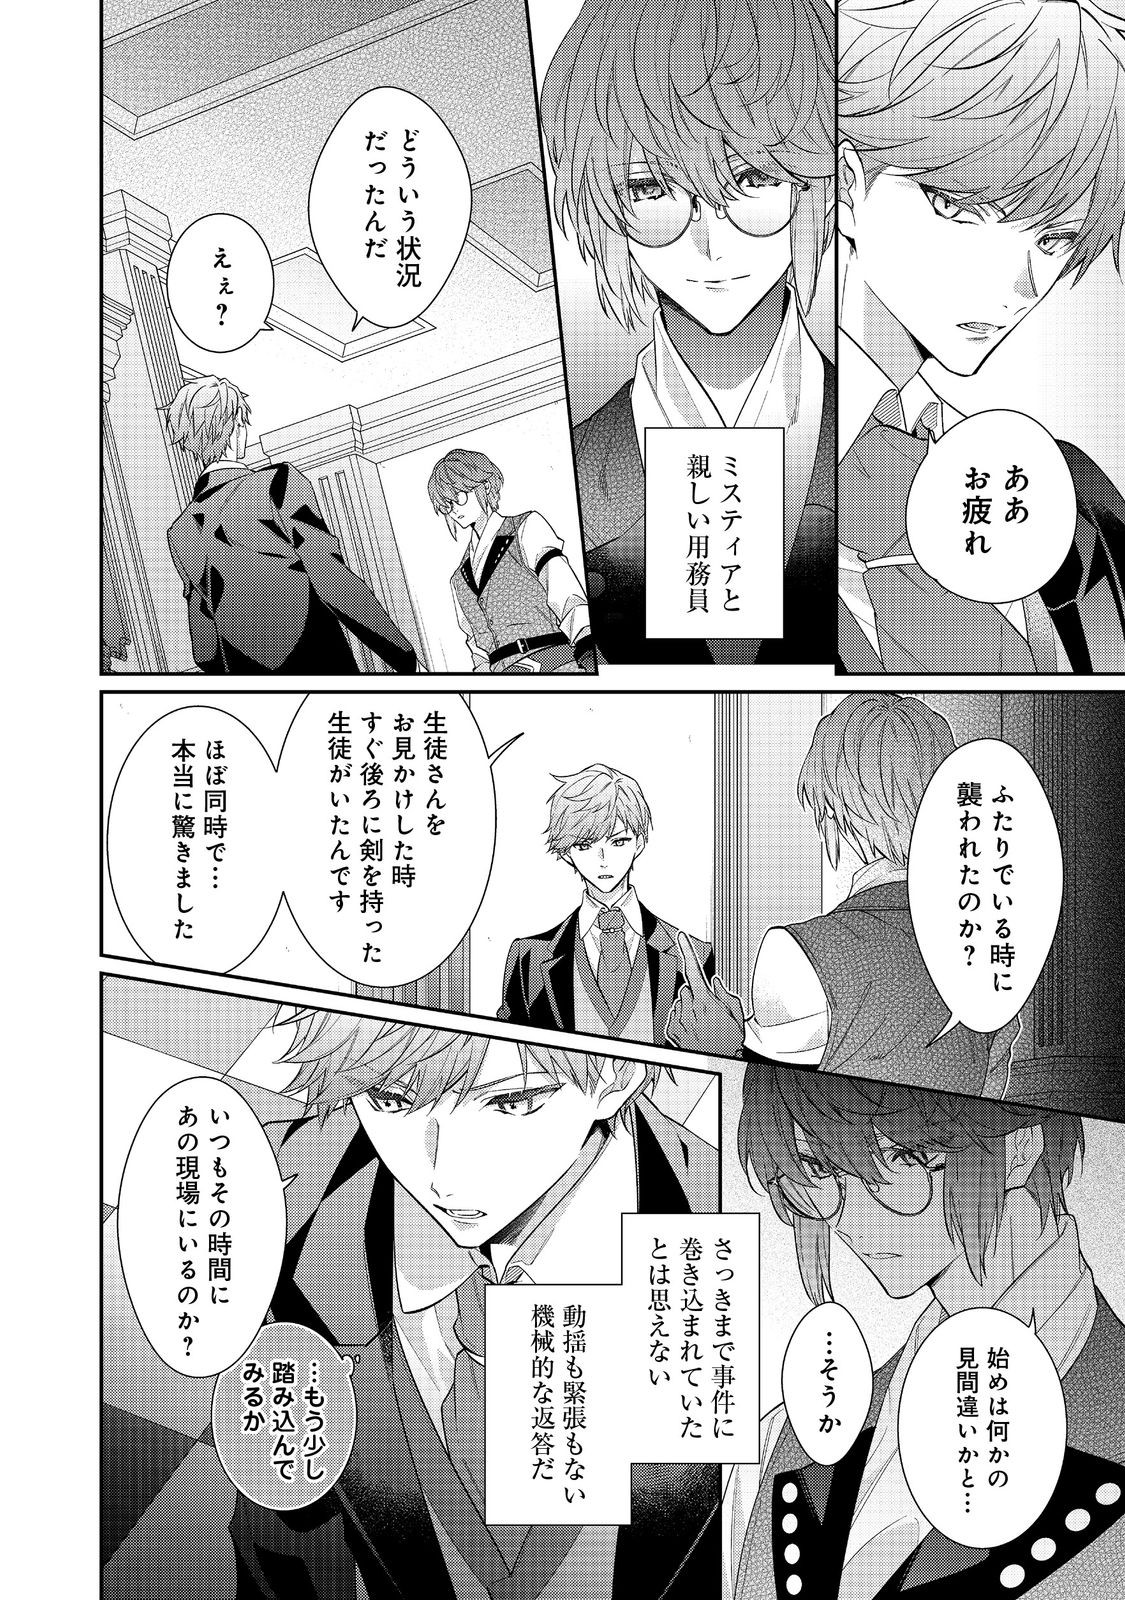 I Was Reincarnated As The Villainess In An Otome Game But The Boys Love Me Anyway! - Chapter 24.1 - Page 2